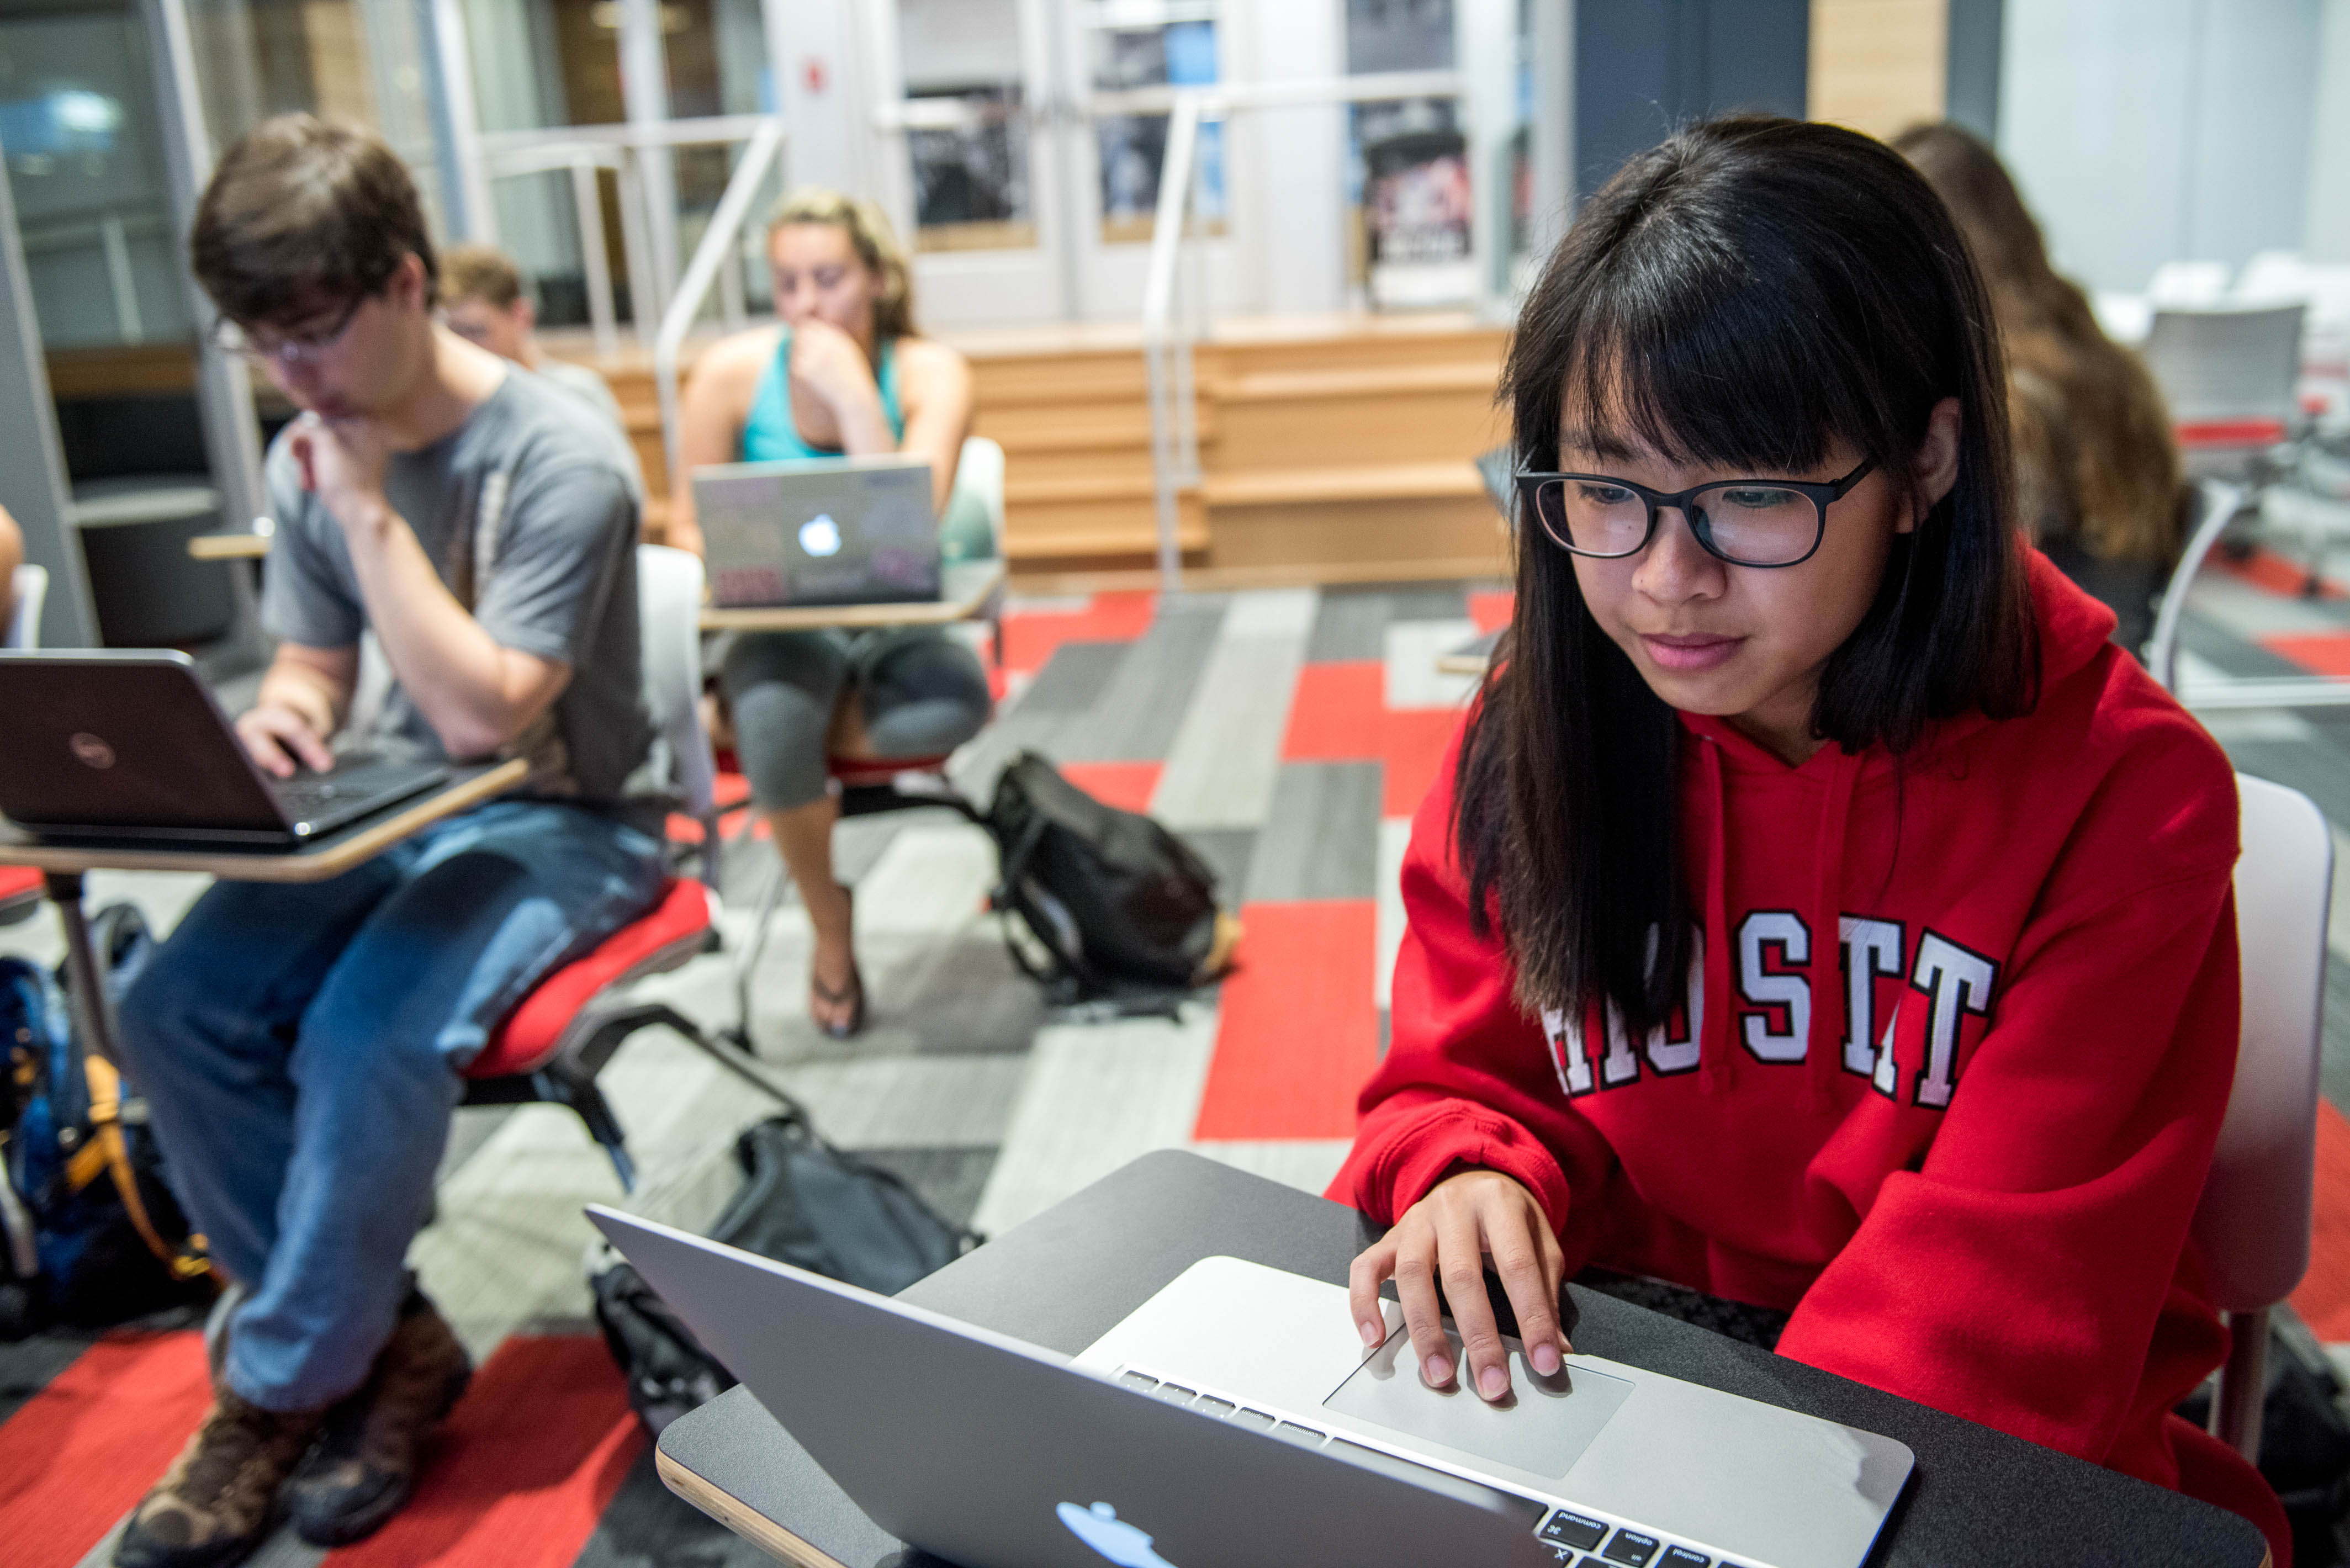 Ohio State students are working on laptops individually in a classroom.